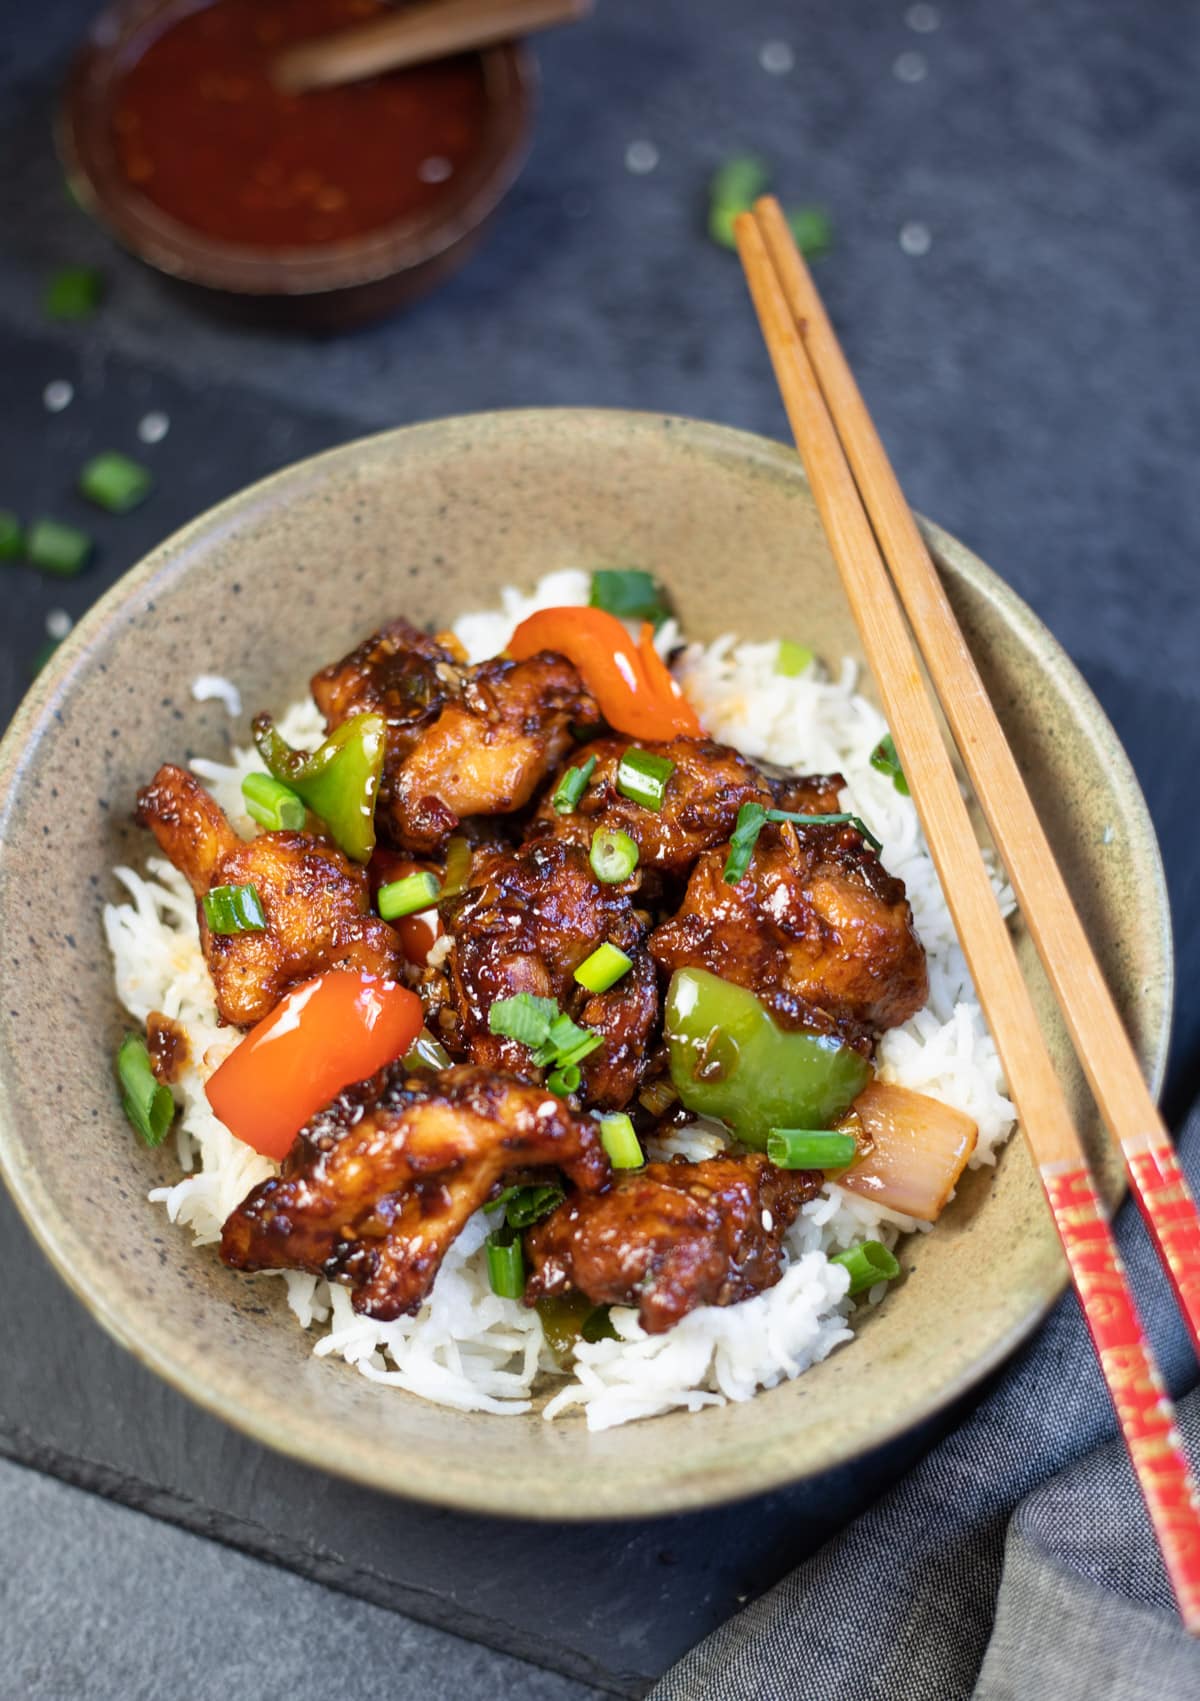 Chilli Chicken over white rice in a bowl, with spicy chili sauce in a small bowl